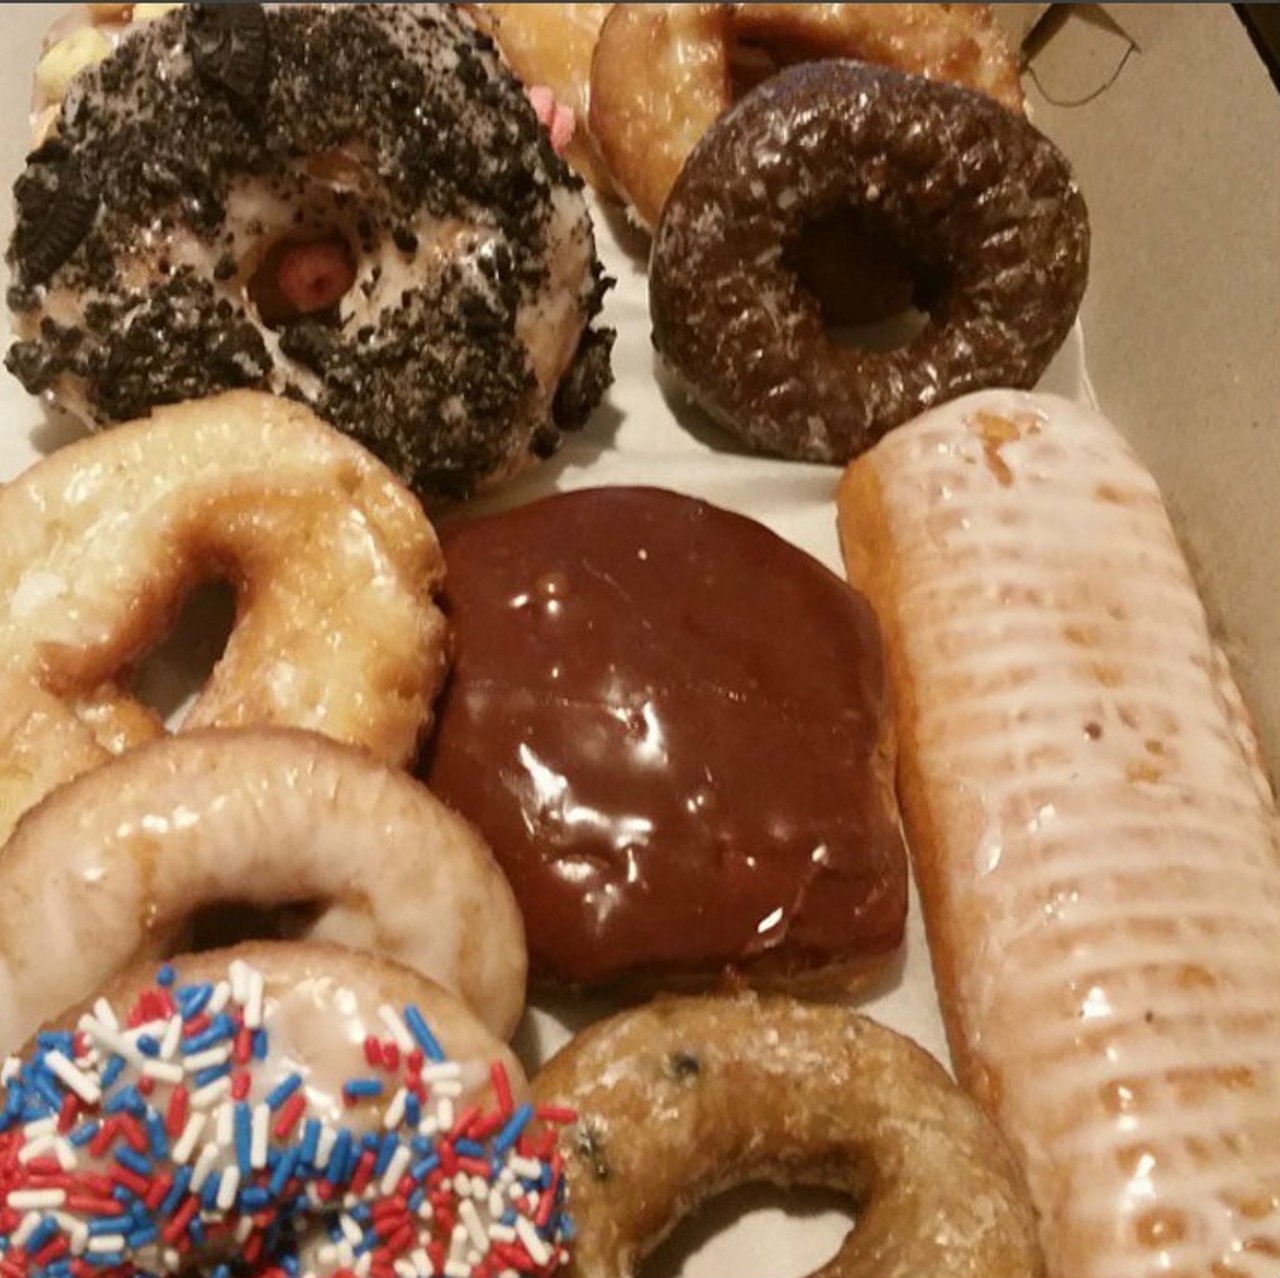 Old Town Donuts
508 S. New Florissant Rd. 
Florissant, MO 63031
(314) 831-0907
On the north side, there&#146;s Old Town Donuts. It&#146;s open 24 hours and hard to beat. Photo courtesy of Instagram / _theif22_.